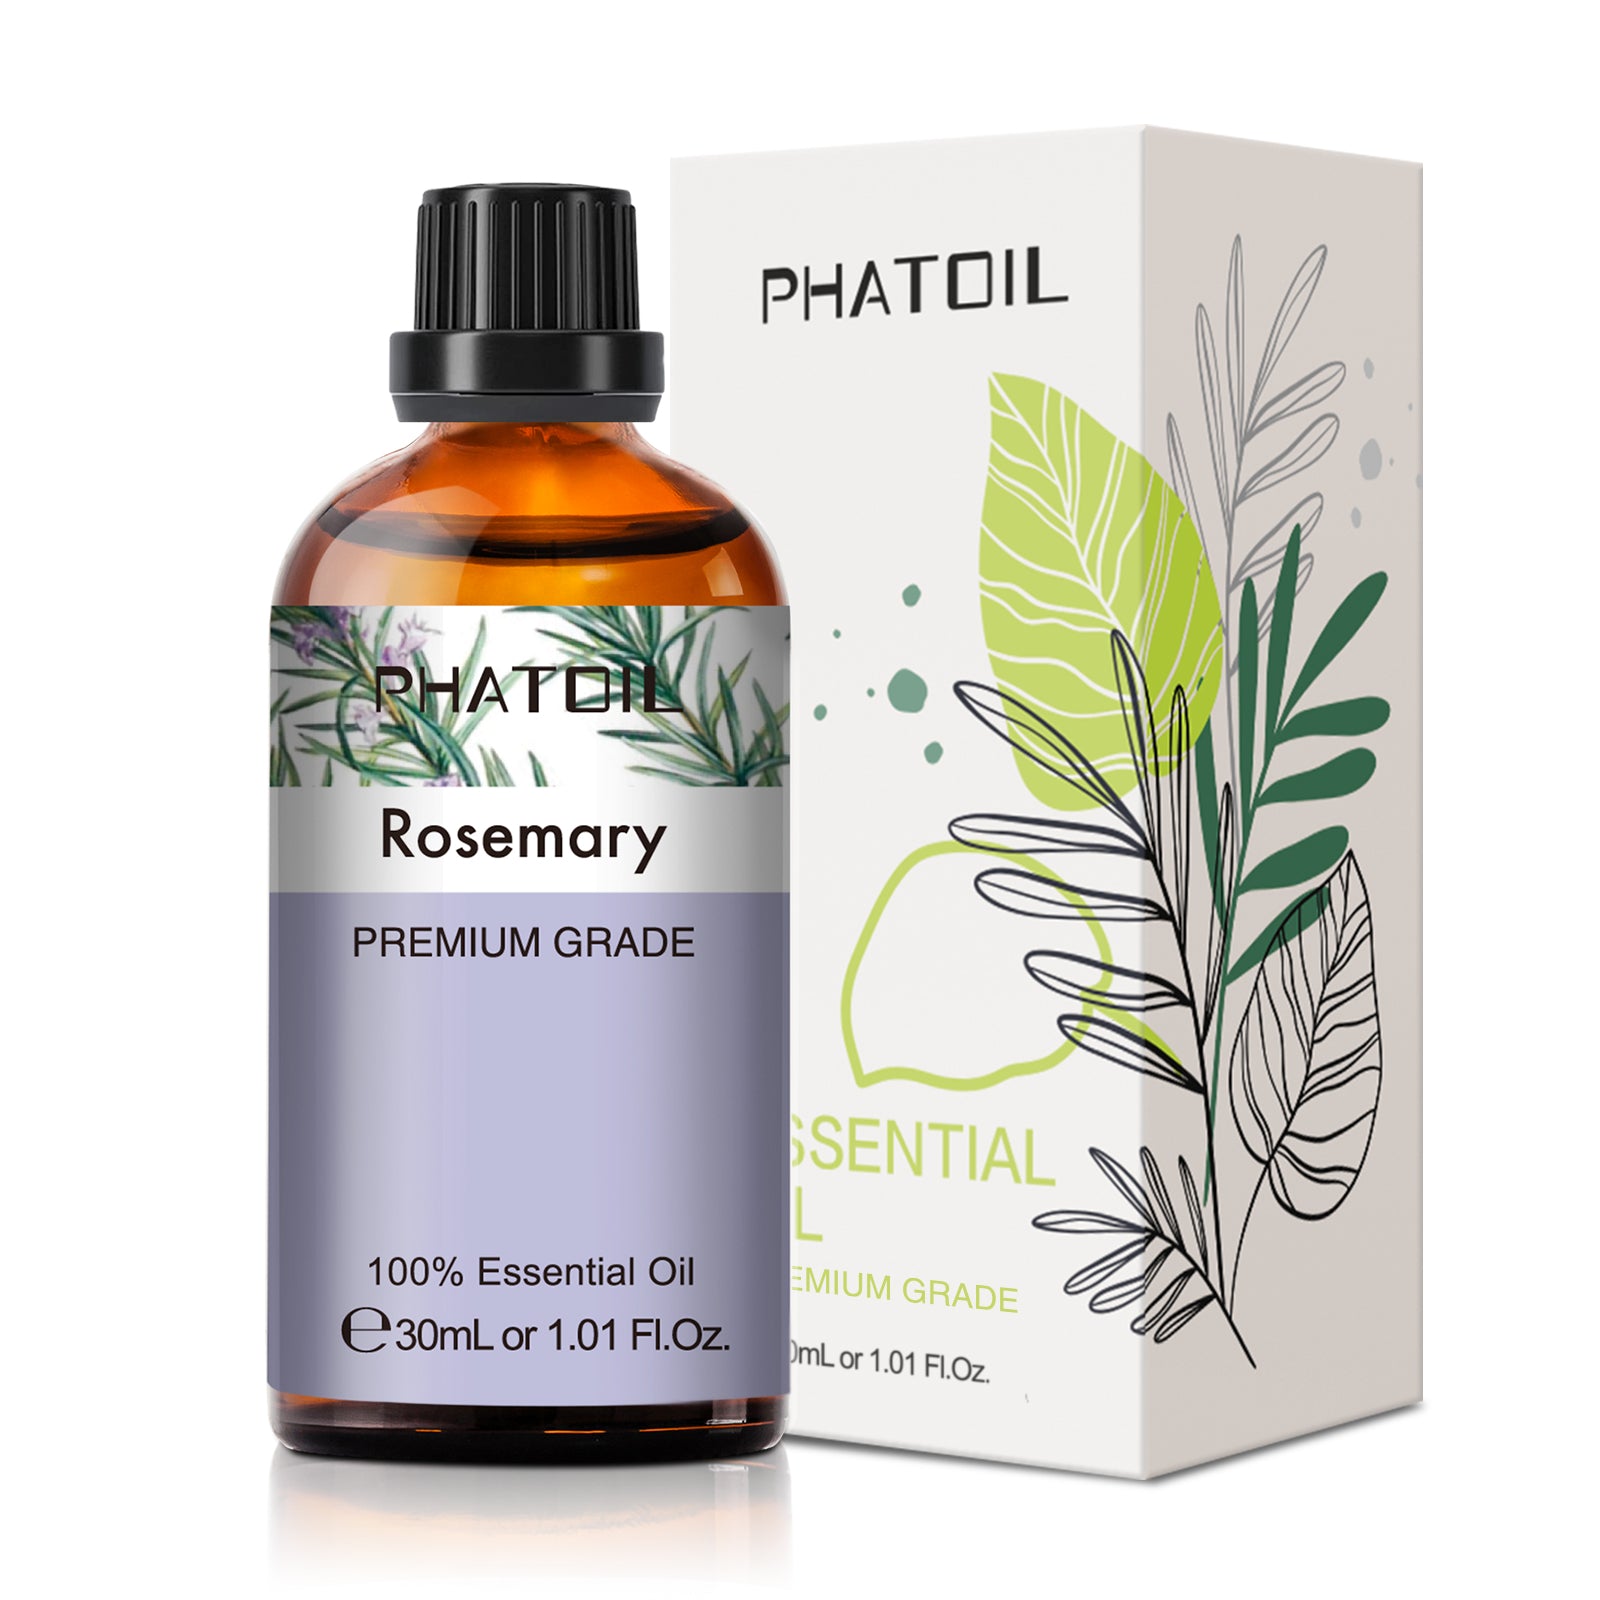 100% Pure Rosemary Essential Oil - Get 20% OFF on All Essential Oils